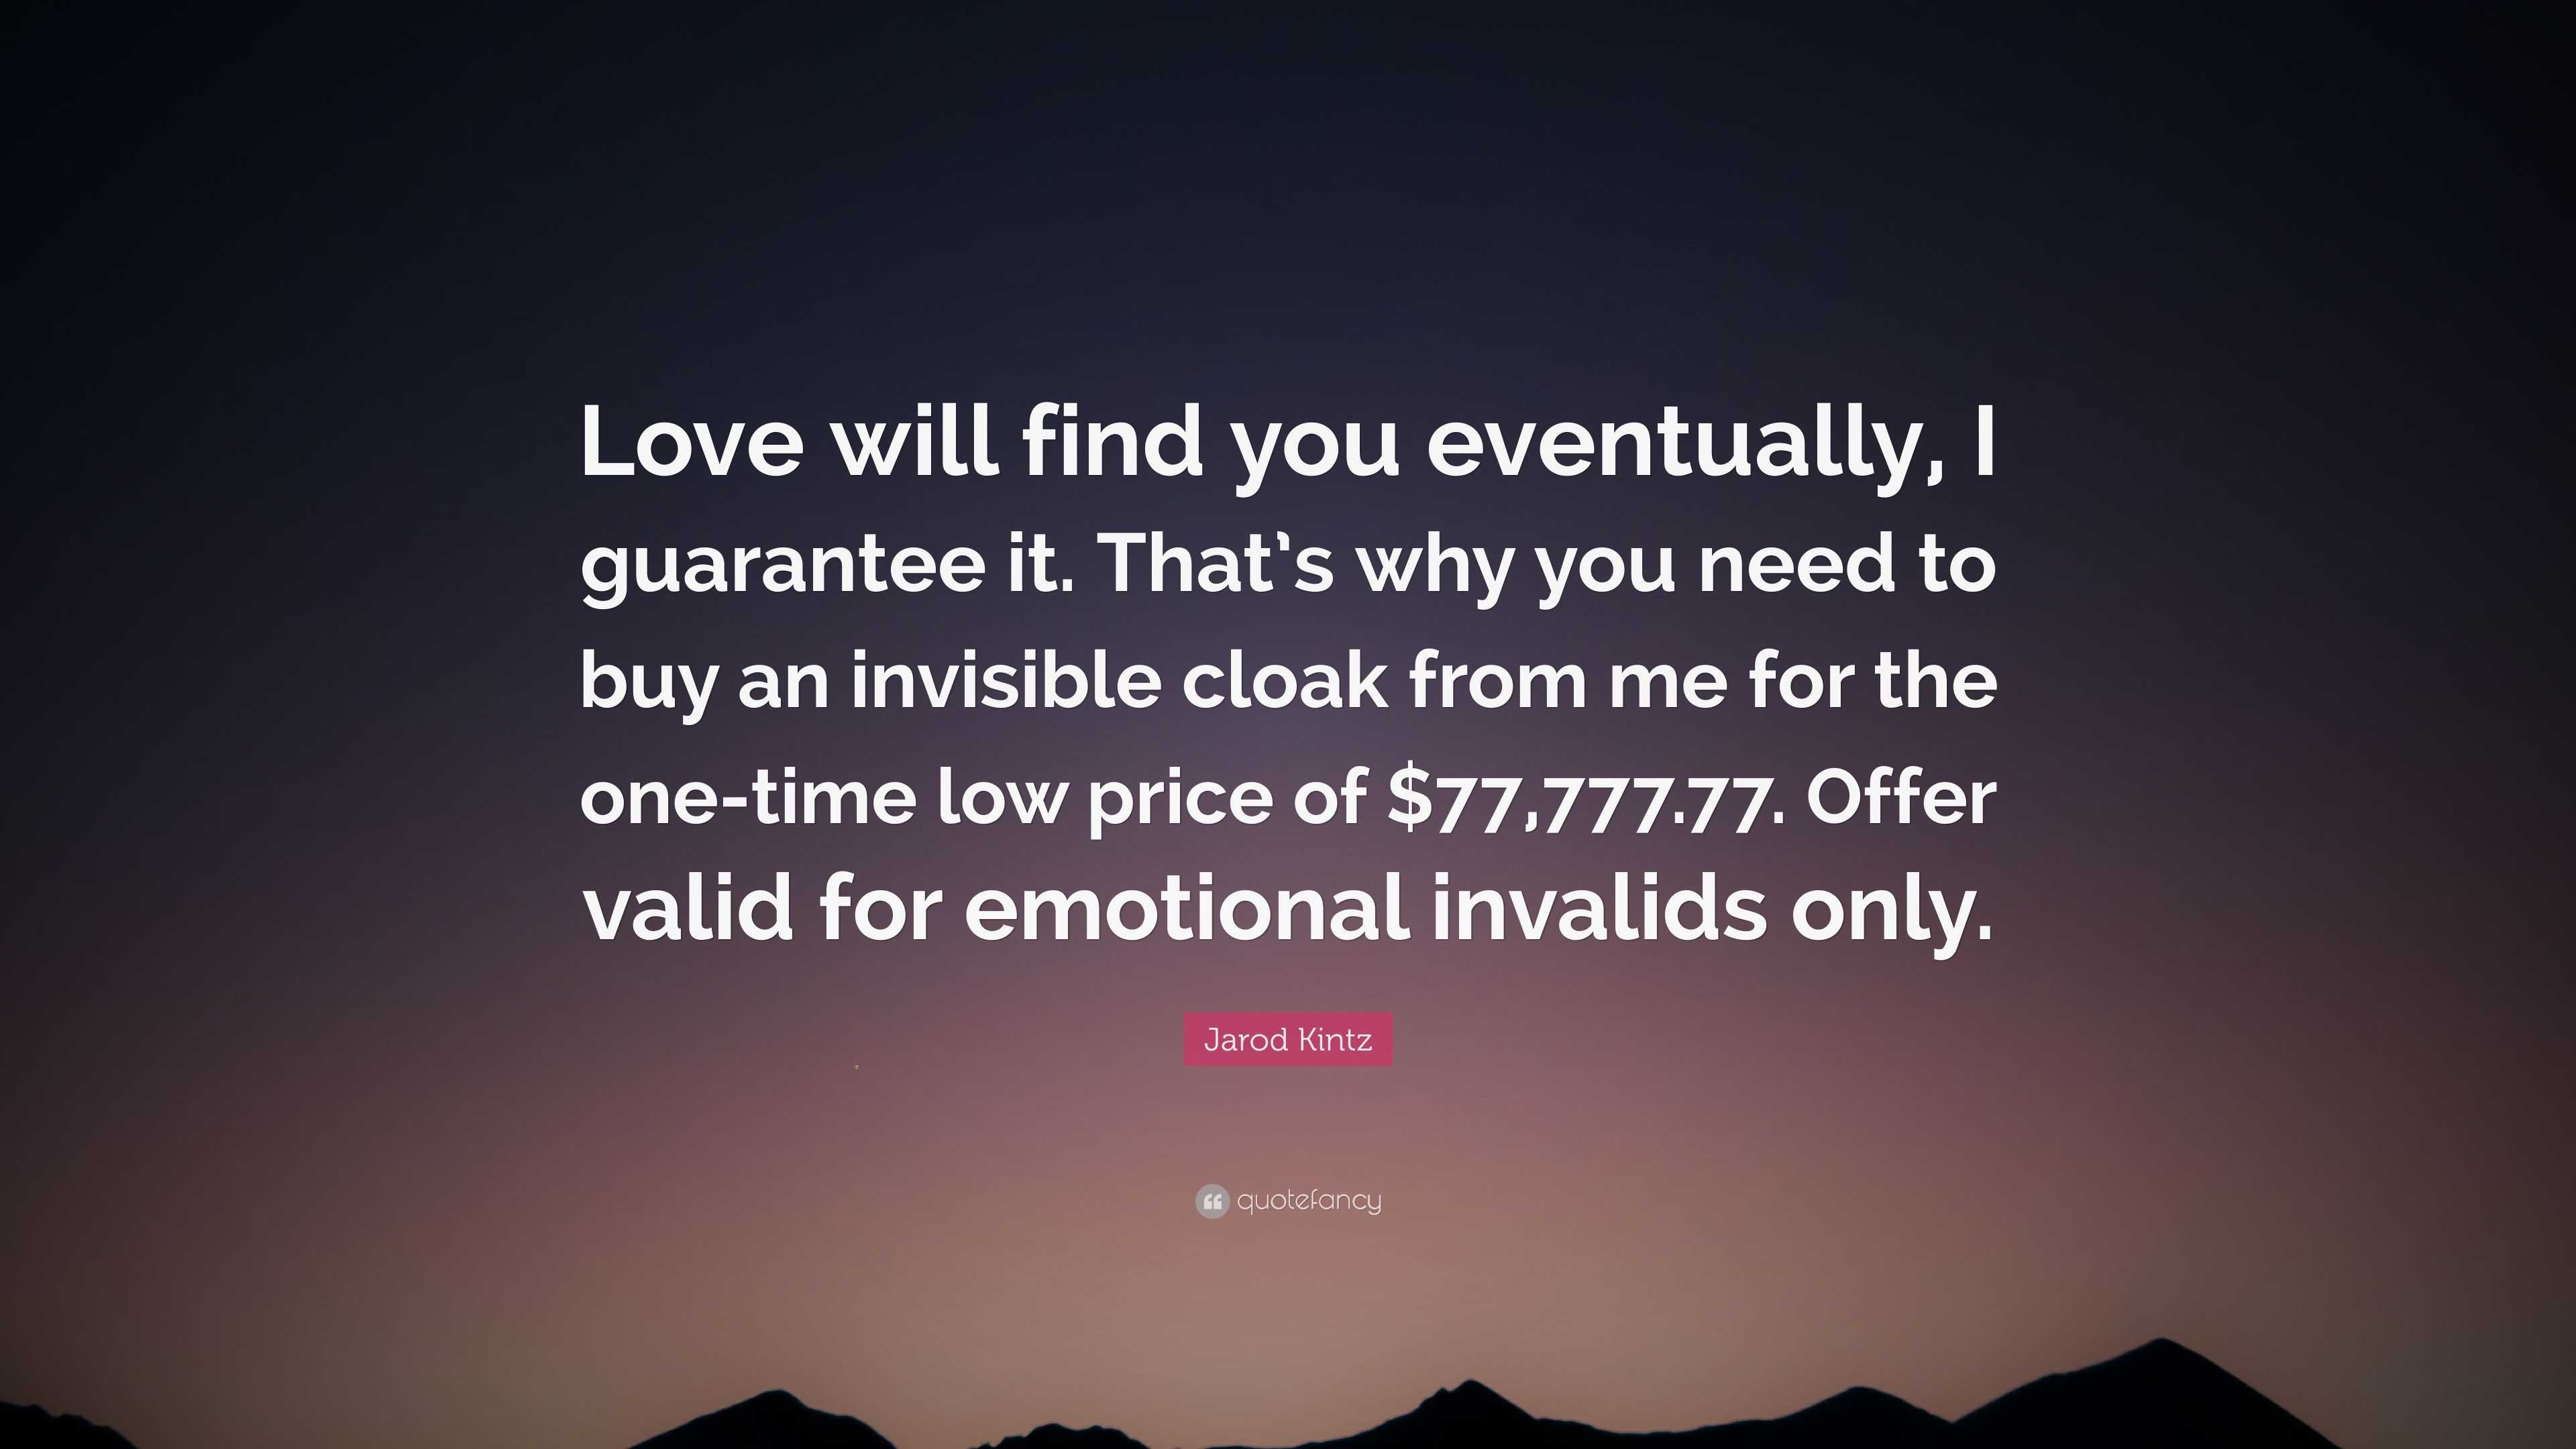 Jarod Kintz Quote “Love will find you eventually I guarantee it That s